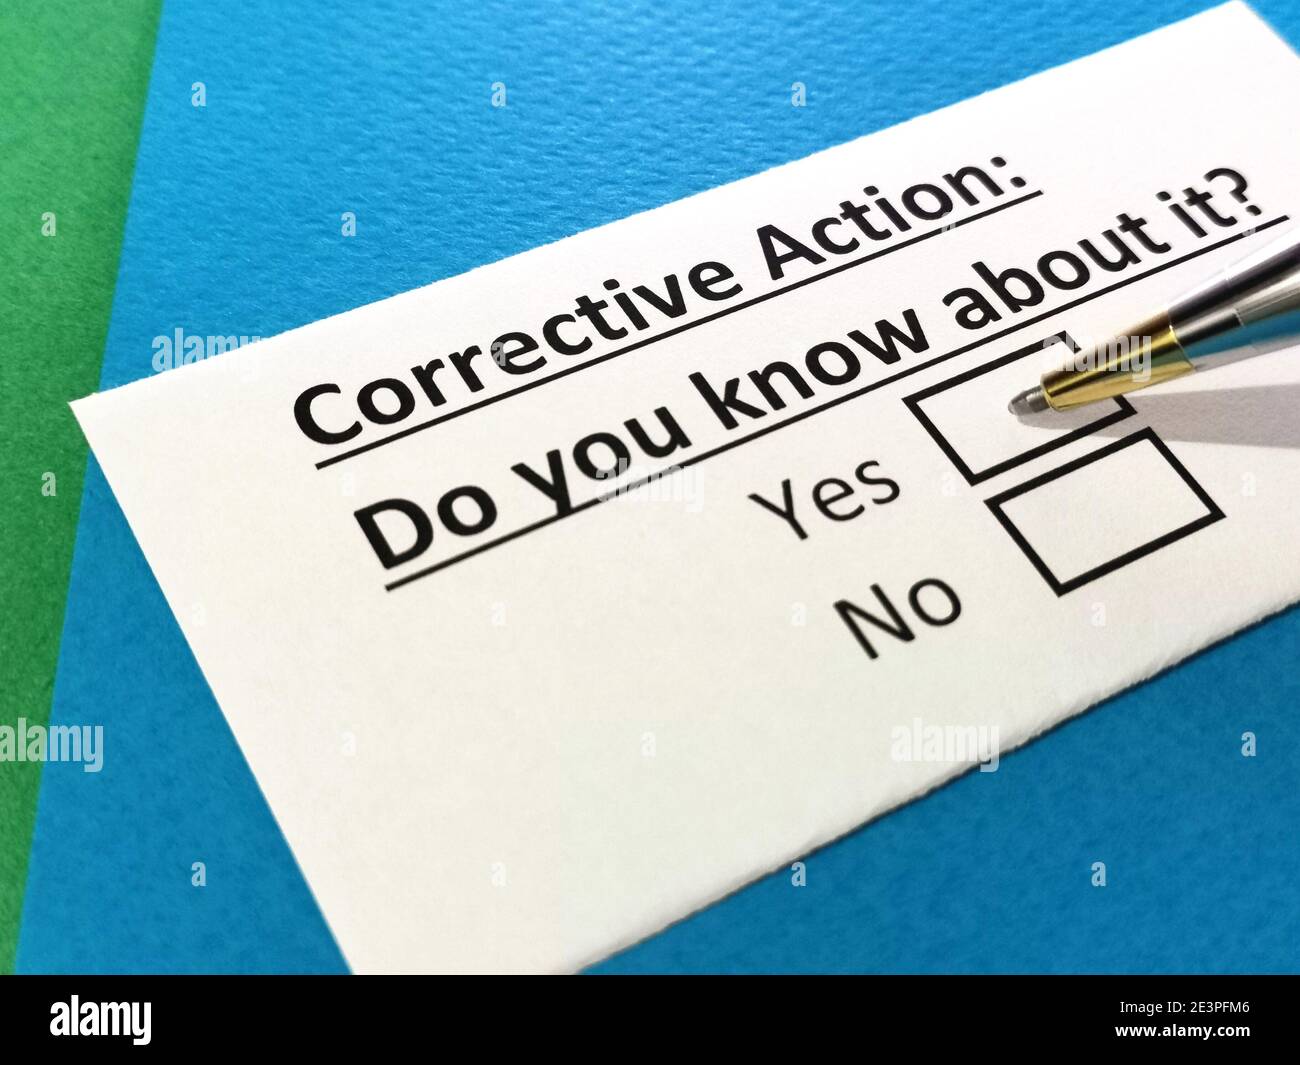 One person is answering question about correective action. Stock Photo